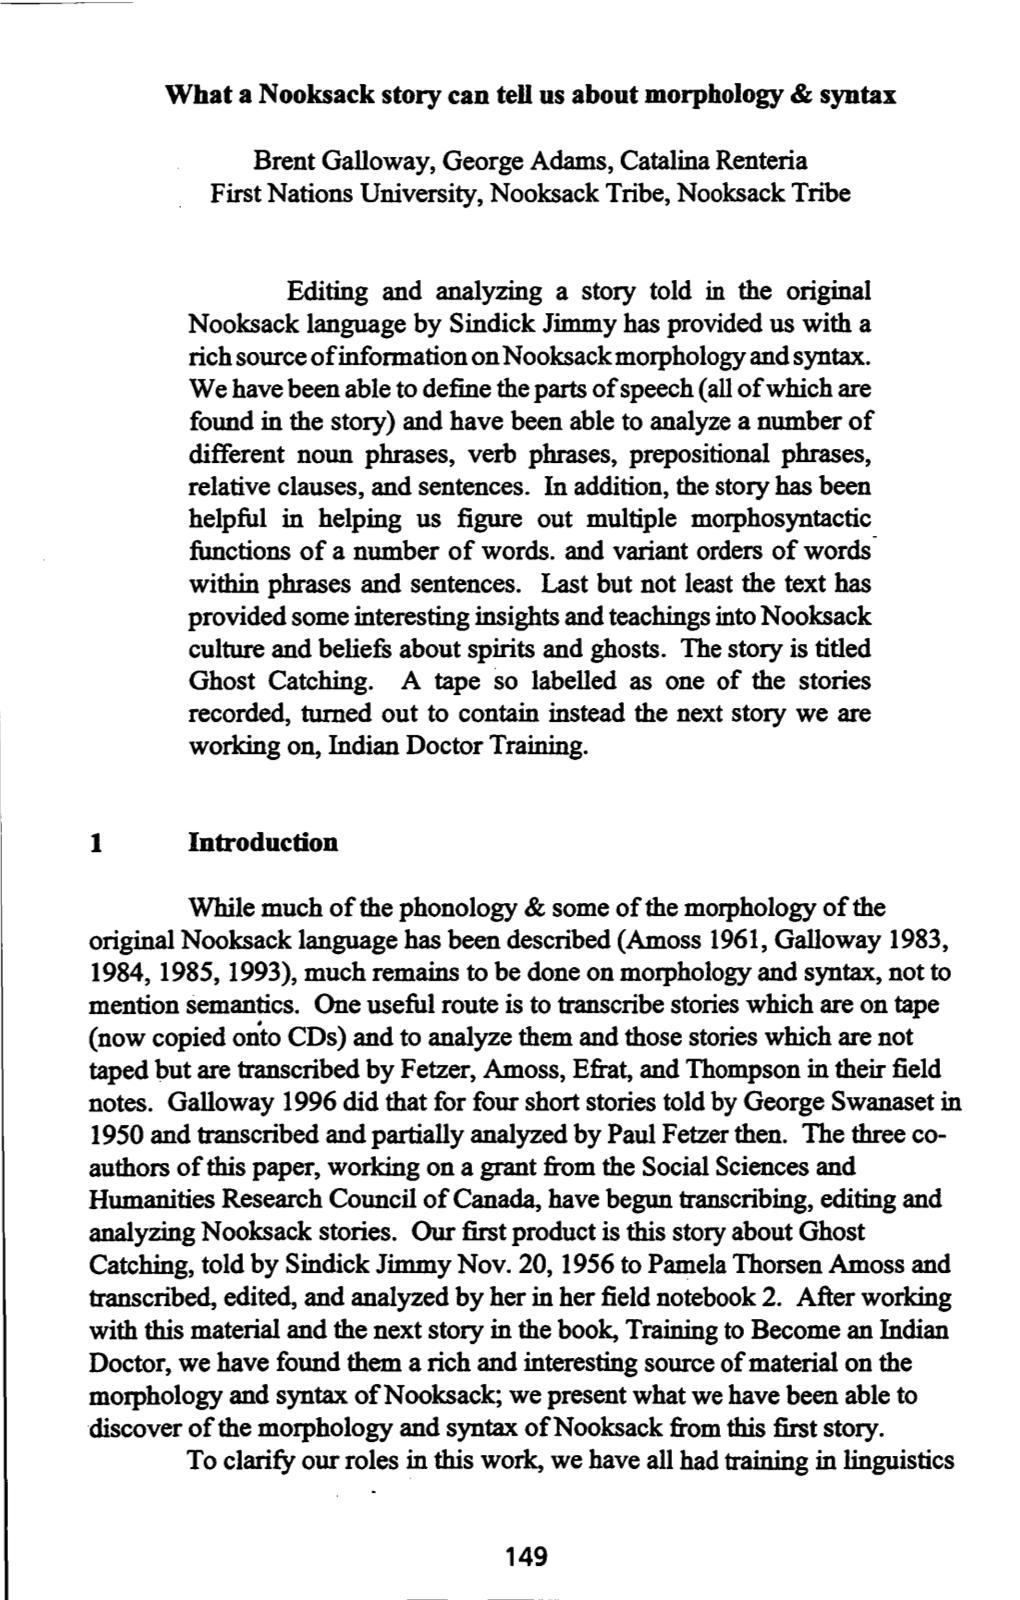 What a Nooksack Story Can Tell Us About Morphology & Syntax 1